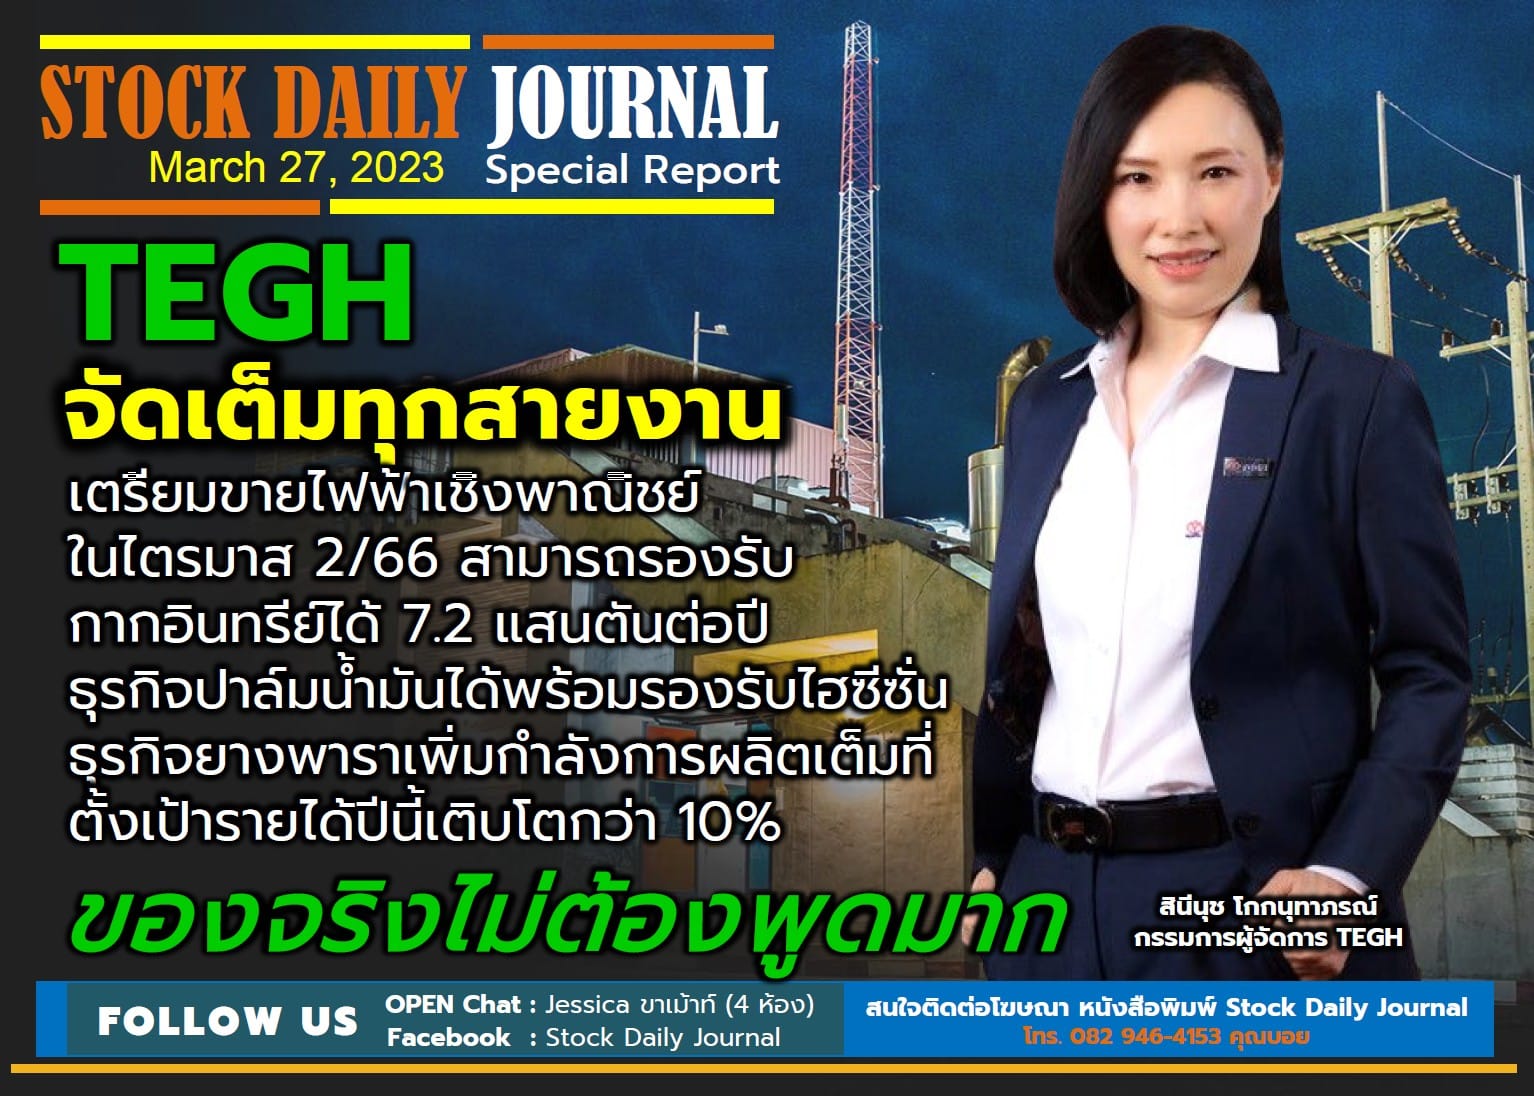 STOCK DAILY JOURNAL “Special Report : TEGH”